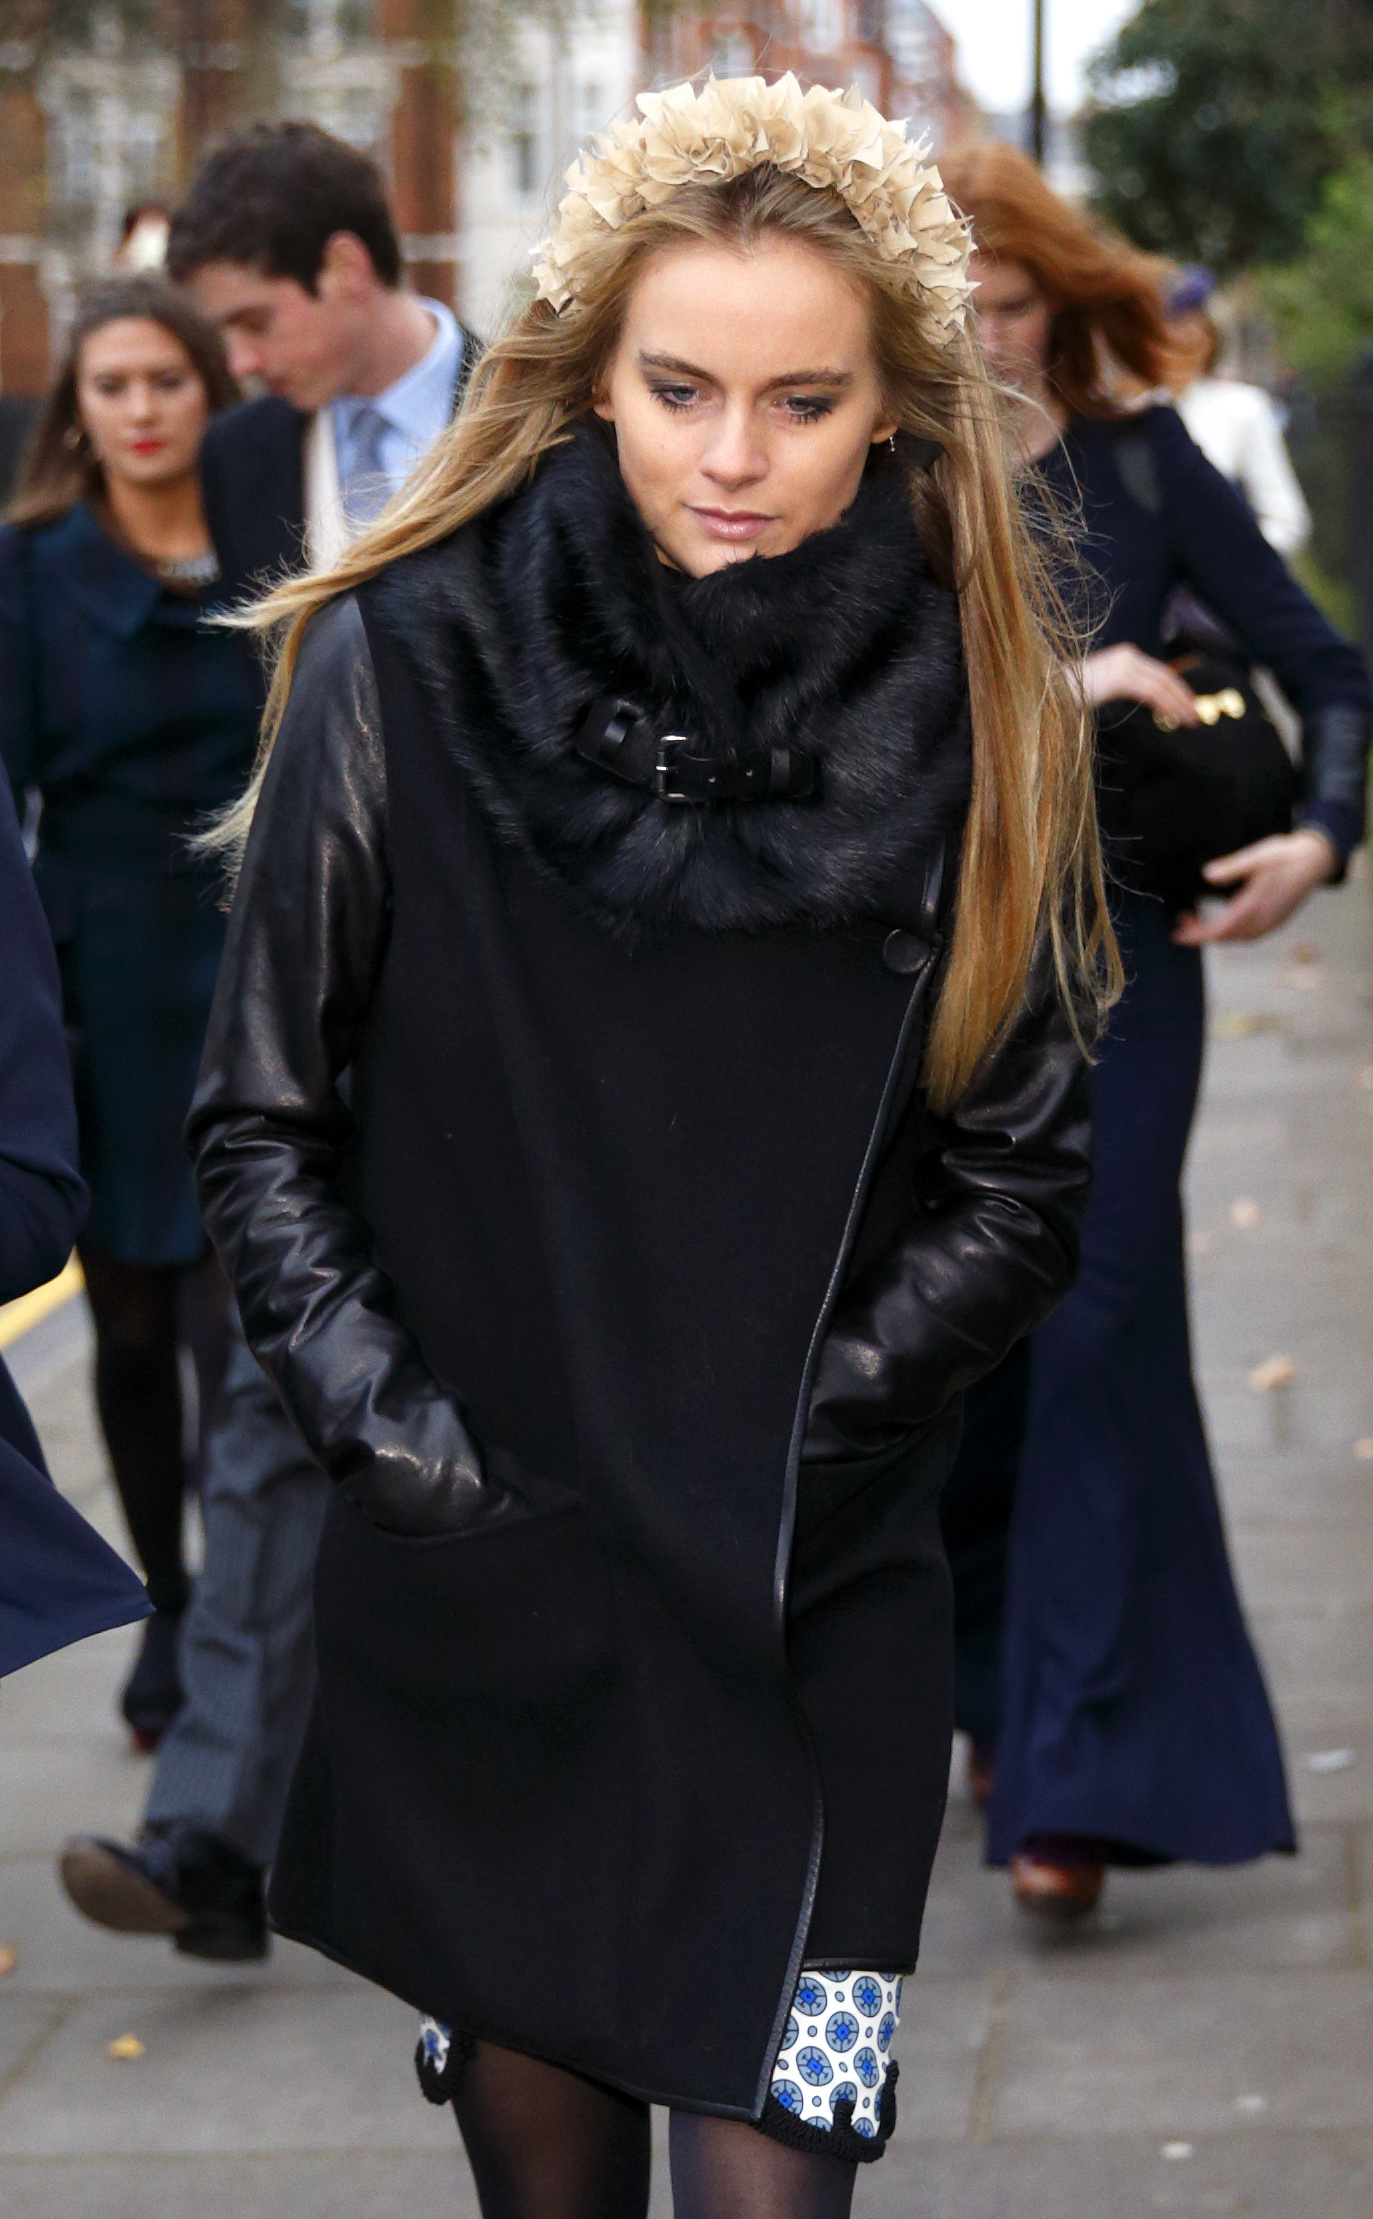 Cressida Bonas attends the wedding of Jake Warren and Zoe Stewart in the Wren Chapel at the Royal Hospital Chelsea on December 14, 2013 in London, England. | Source: Getty Images